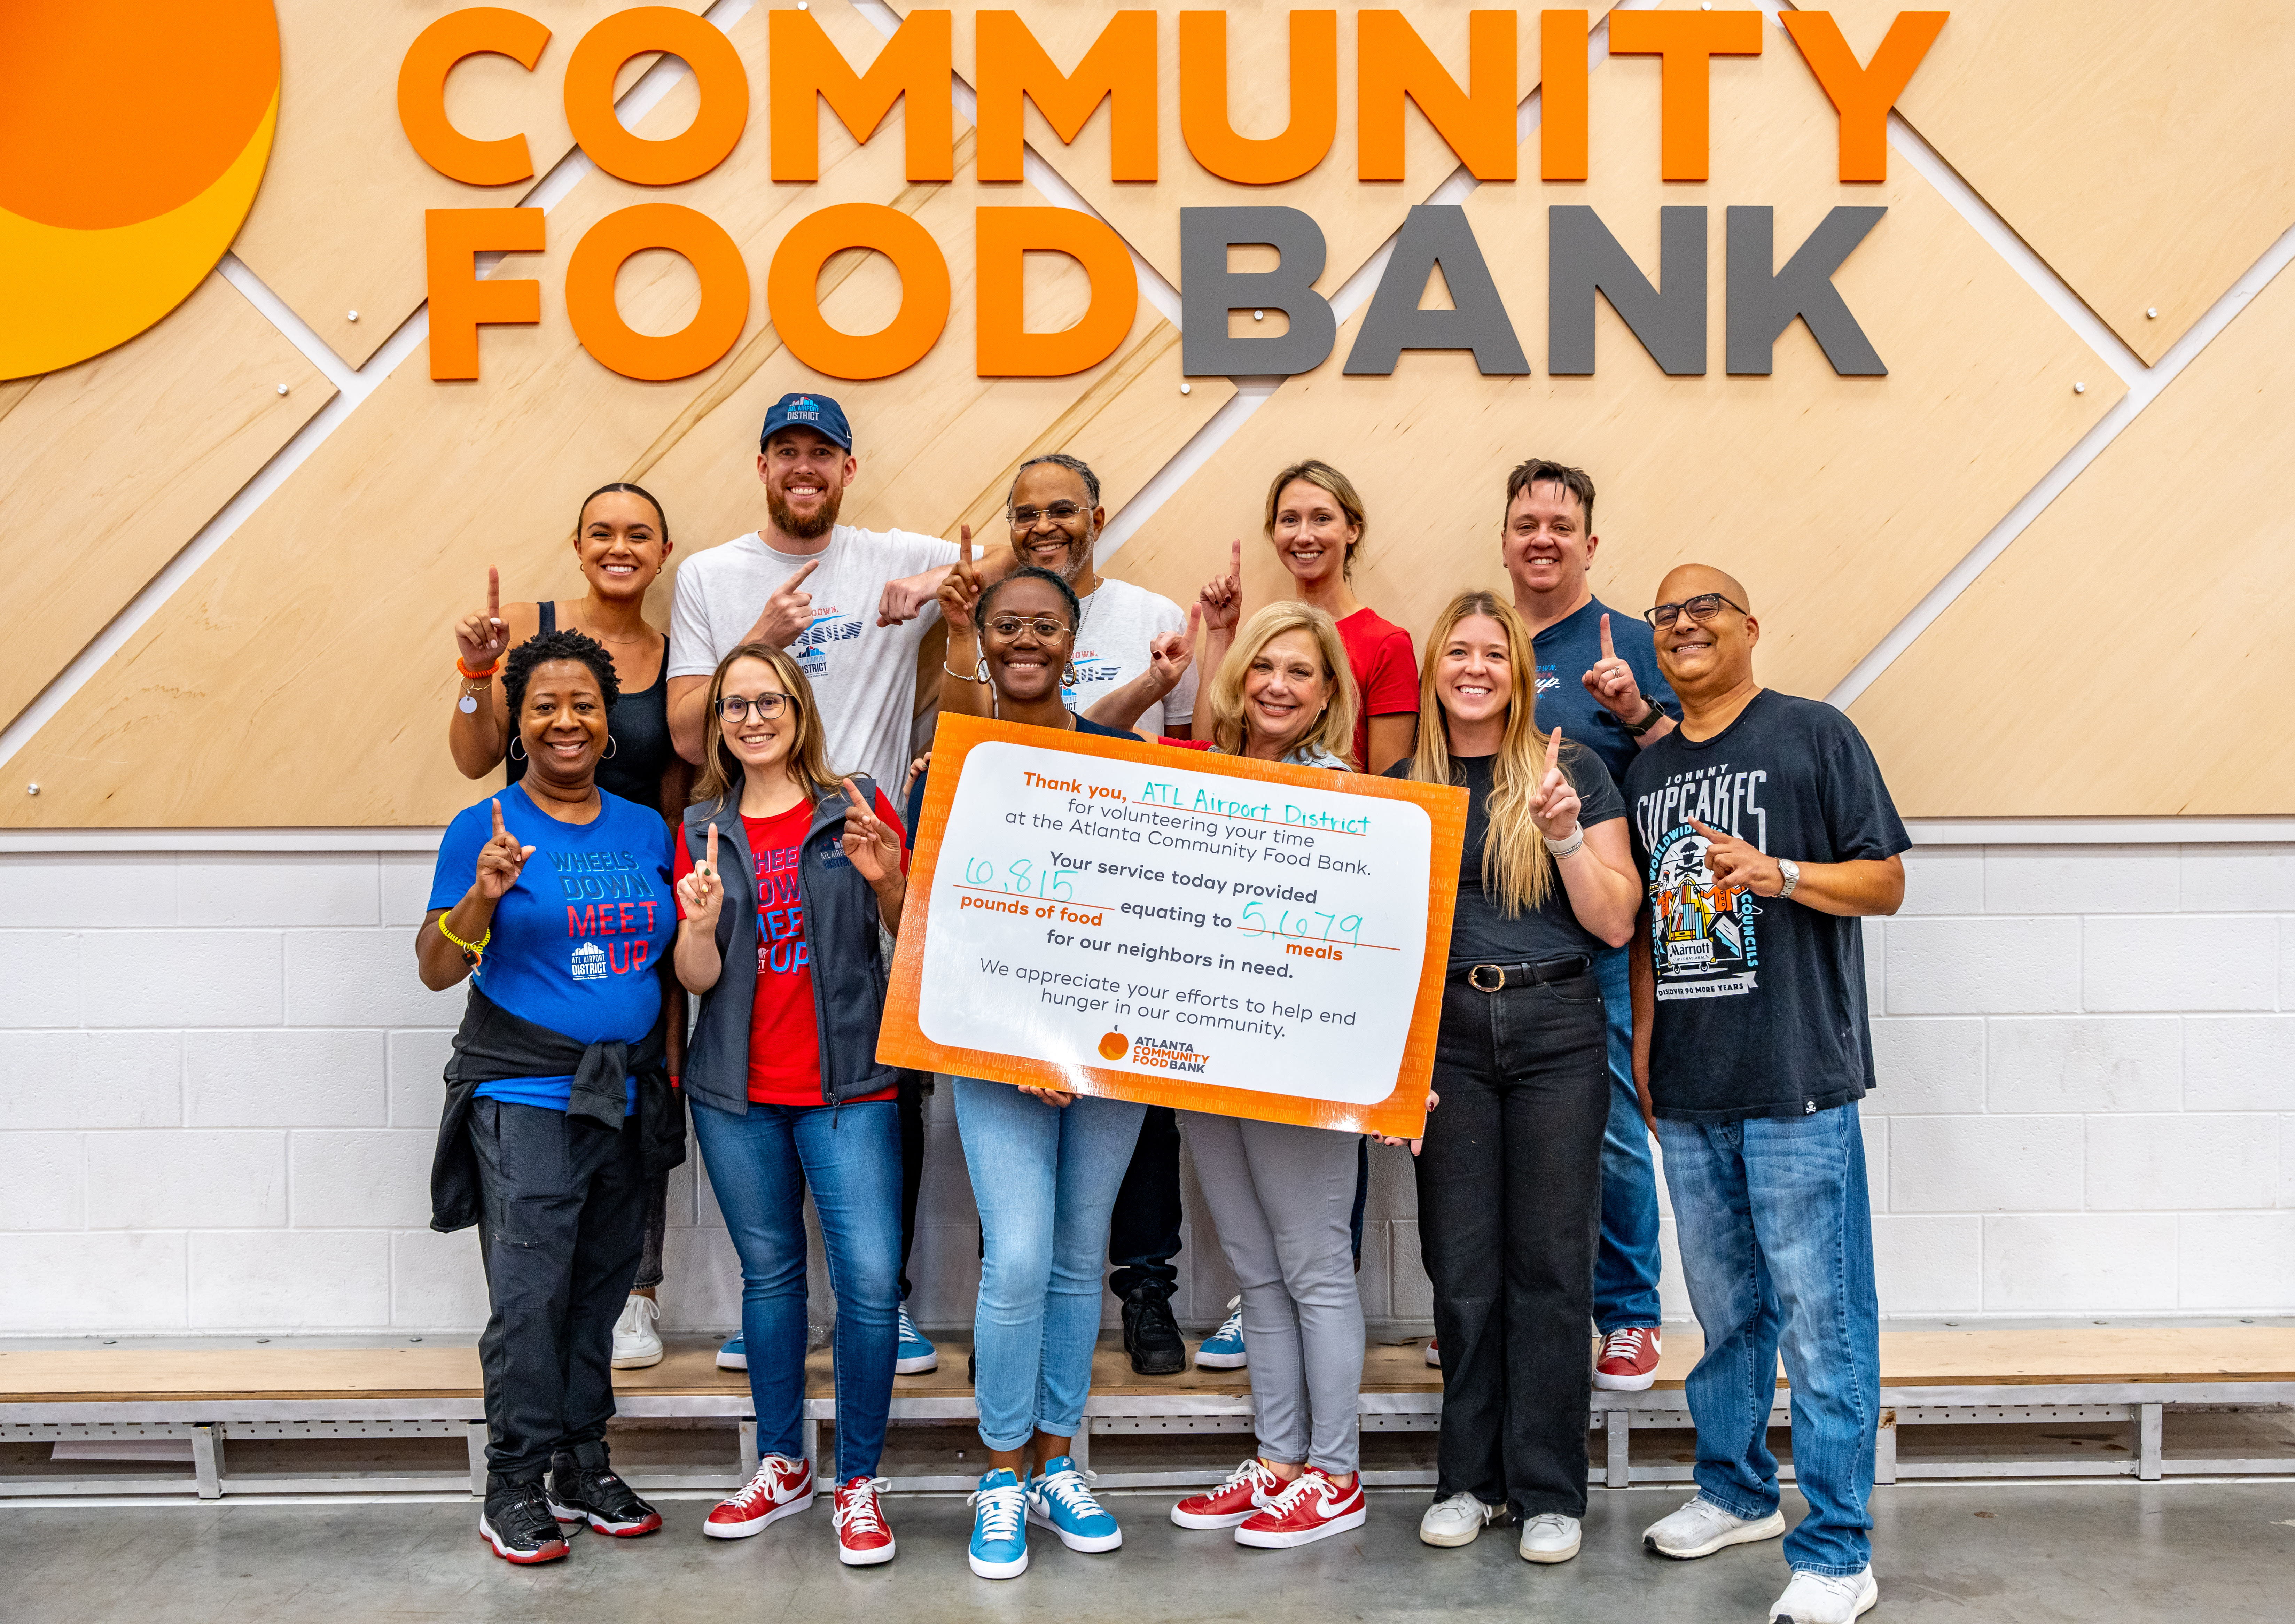 ATL Airport District poses at the Atlanta Community Food Bank holding a sign with the amount of meals sorted.